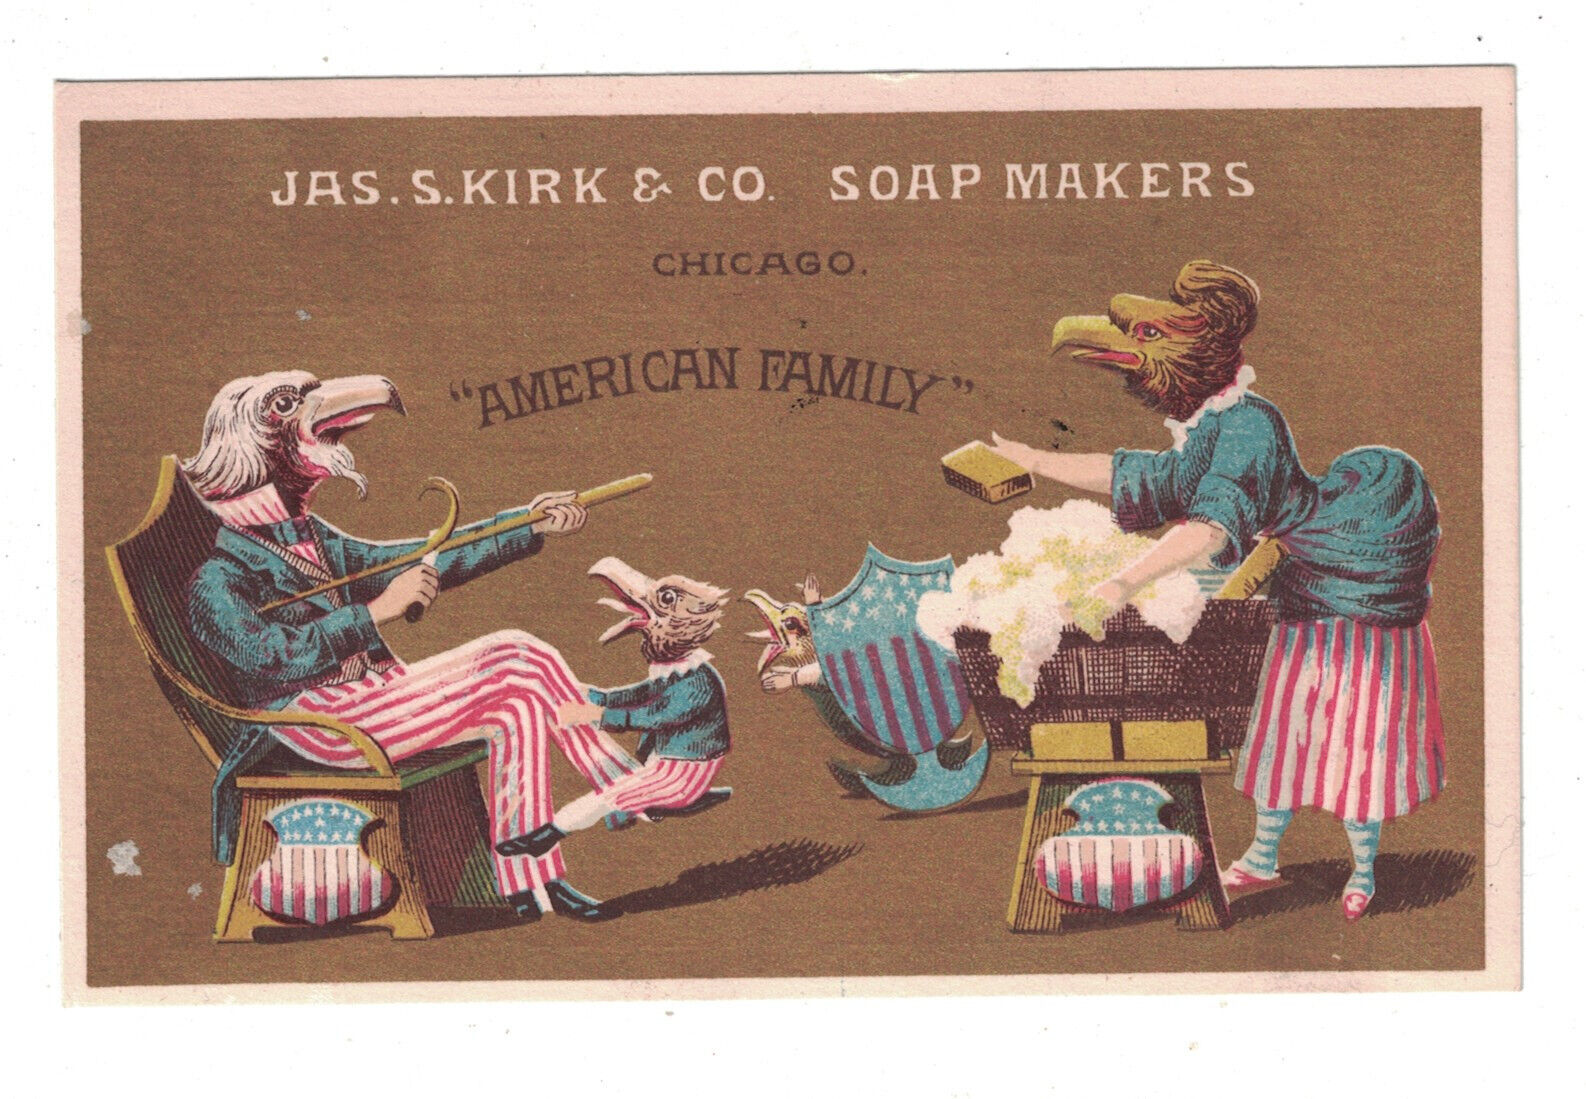 Jas S Kirk Soap Chicago trade card 1880s Mr & Mrs American Eagle Family